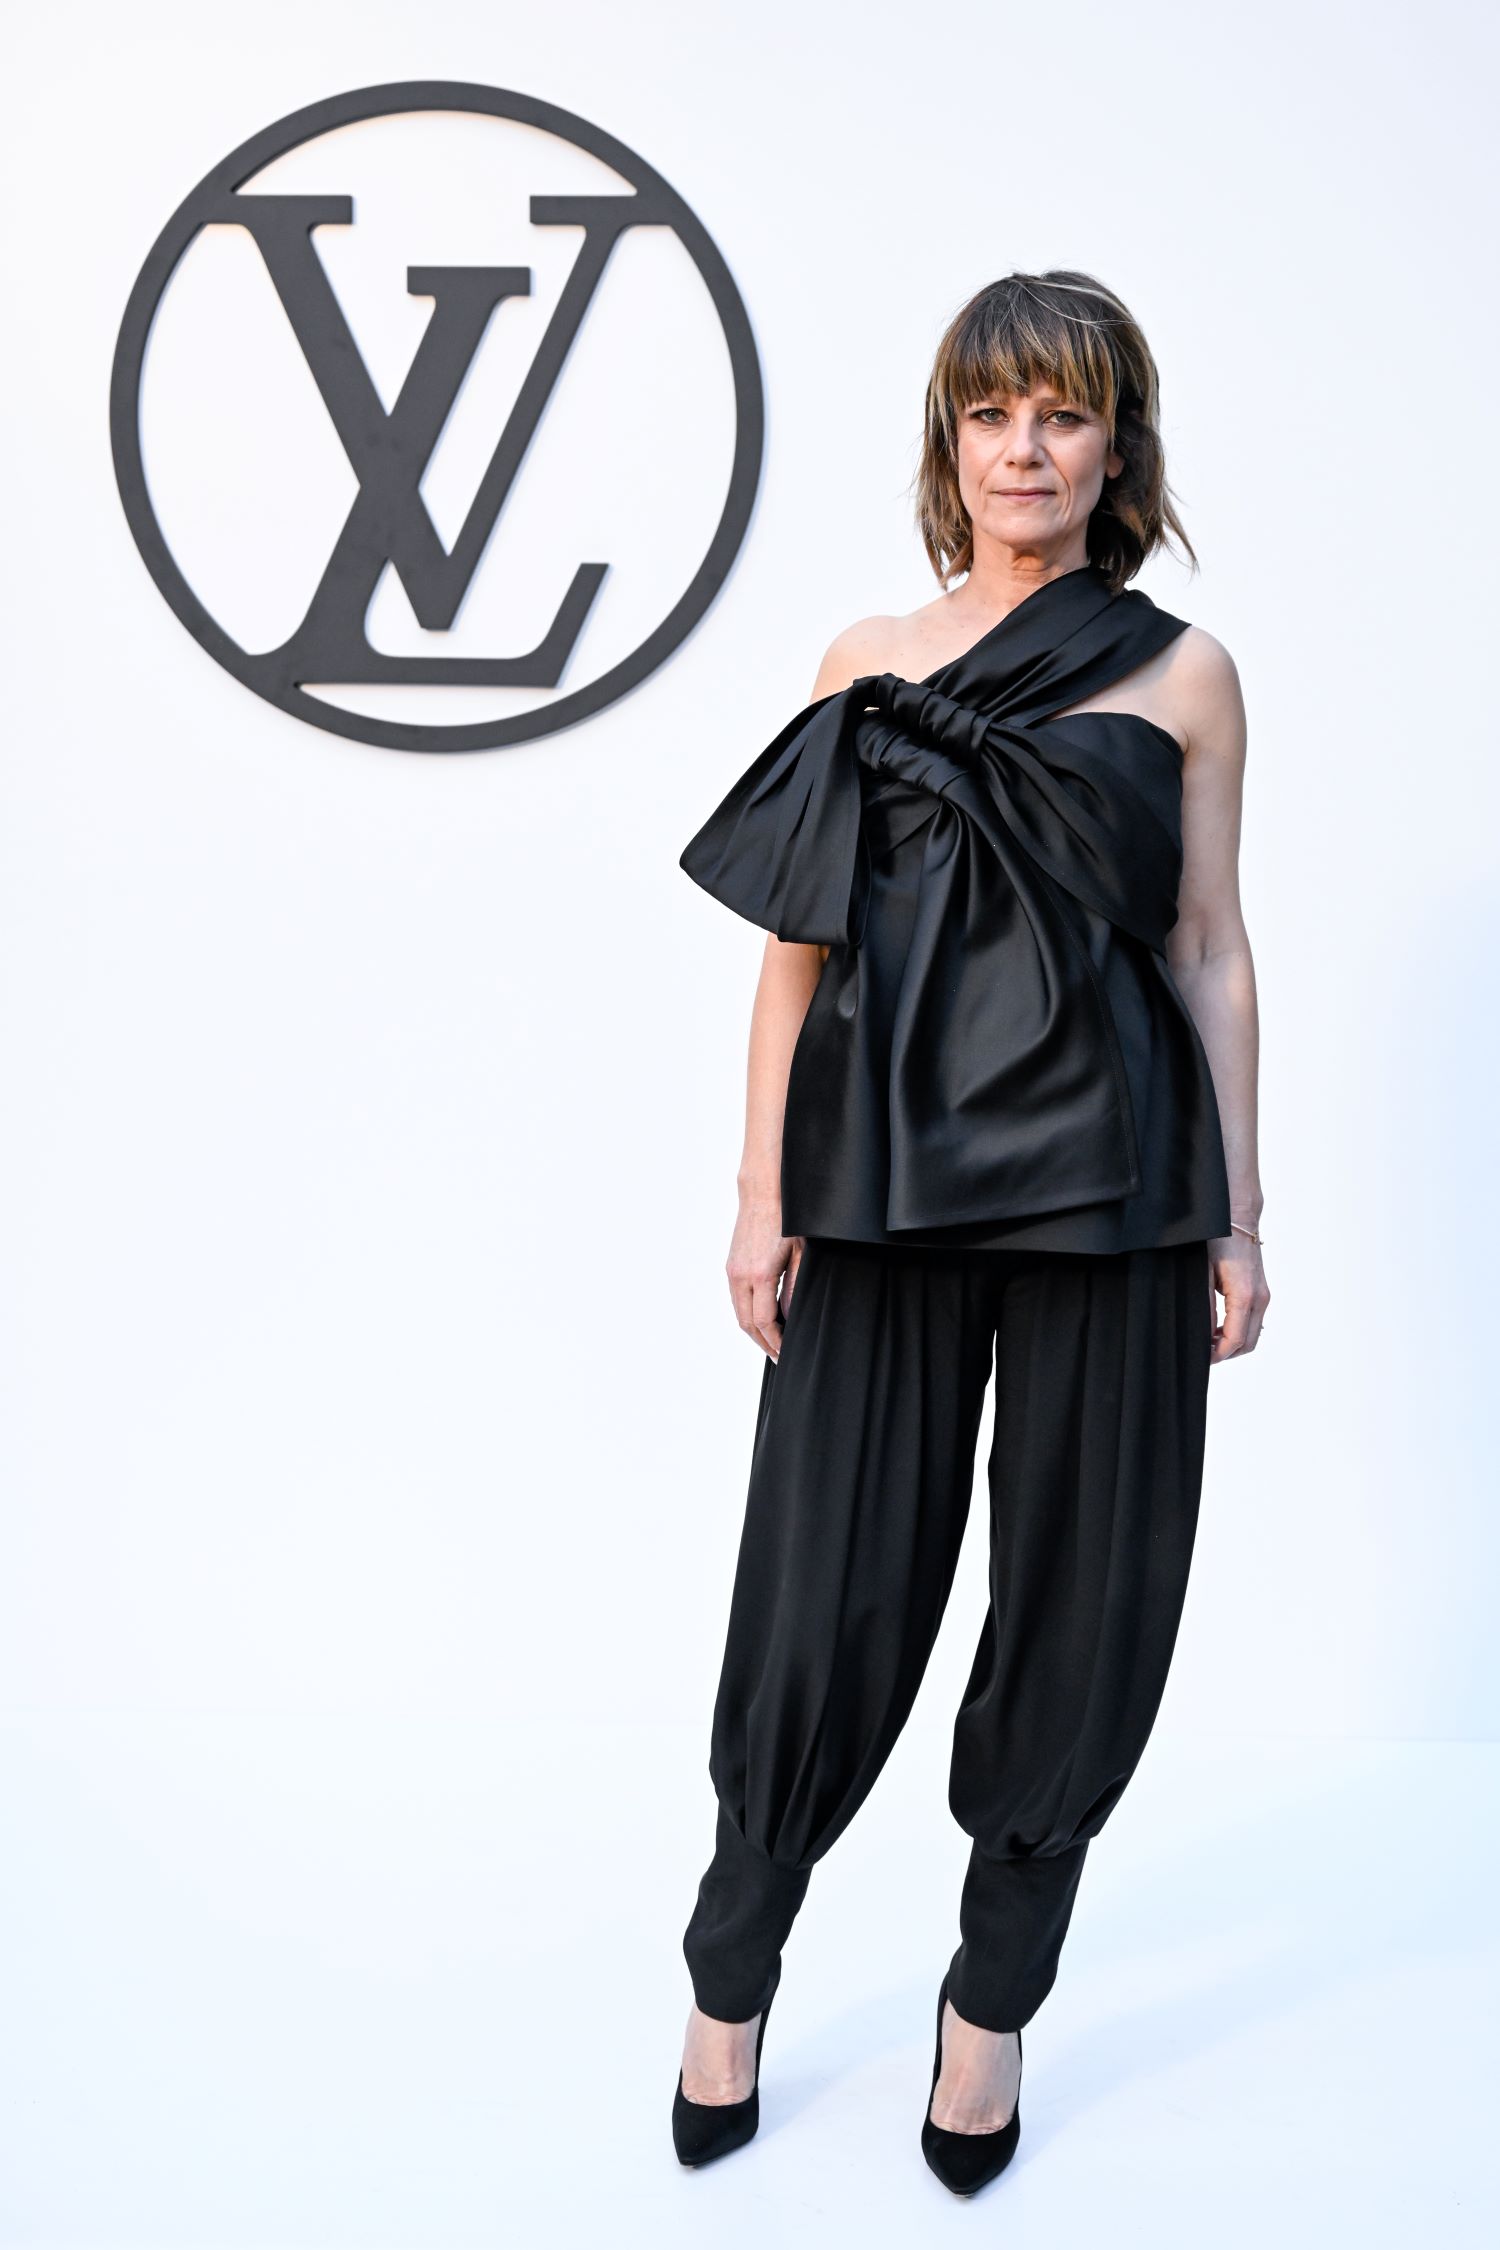 MARINA FOIS attending the Cruise 2025 Fashion Show by Louis Vuitton in Barcelona | CRUISE 2025 FASHION SHOW COLLECTION © Louis Vuitton – All rights reserved | Courtesy of Gnazzo Group.